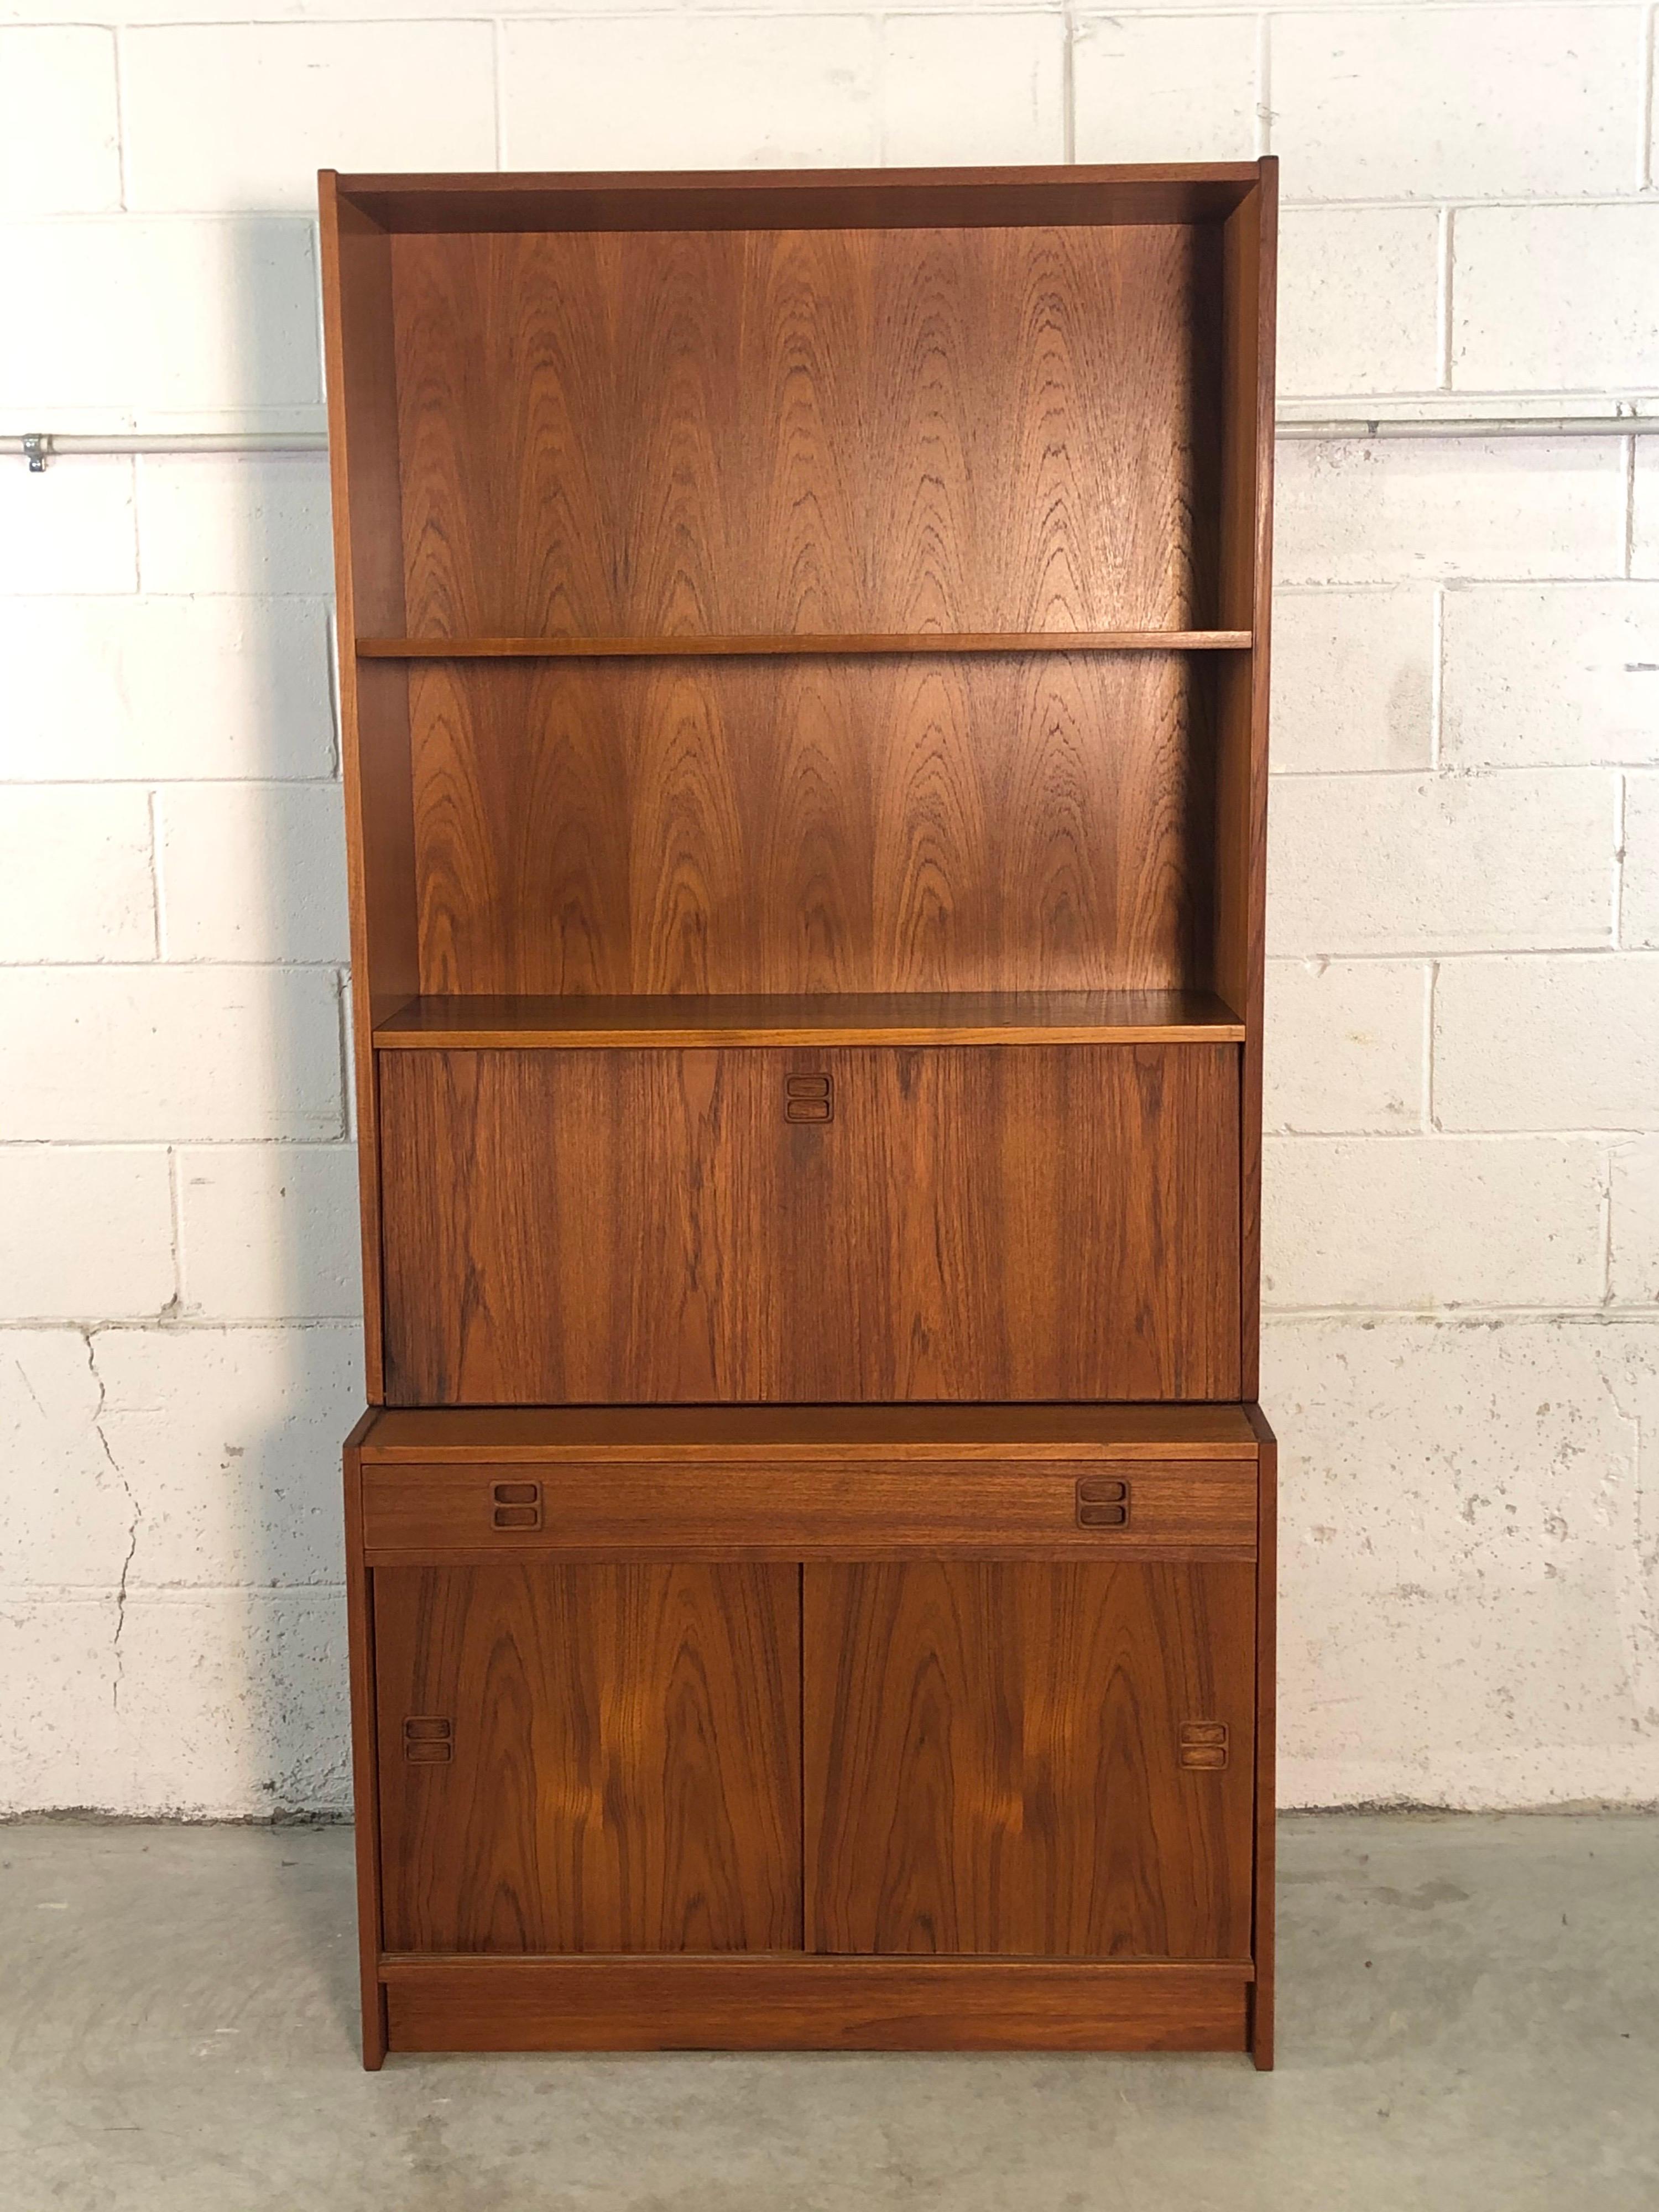 Vintage Danish teak secretary desk with shelving and a storage cabinet on the bottom. This versatile piece of furniture has a lot of storage options and can be used for different needs. Shelves can not be adjusted. Designed by Feldballes